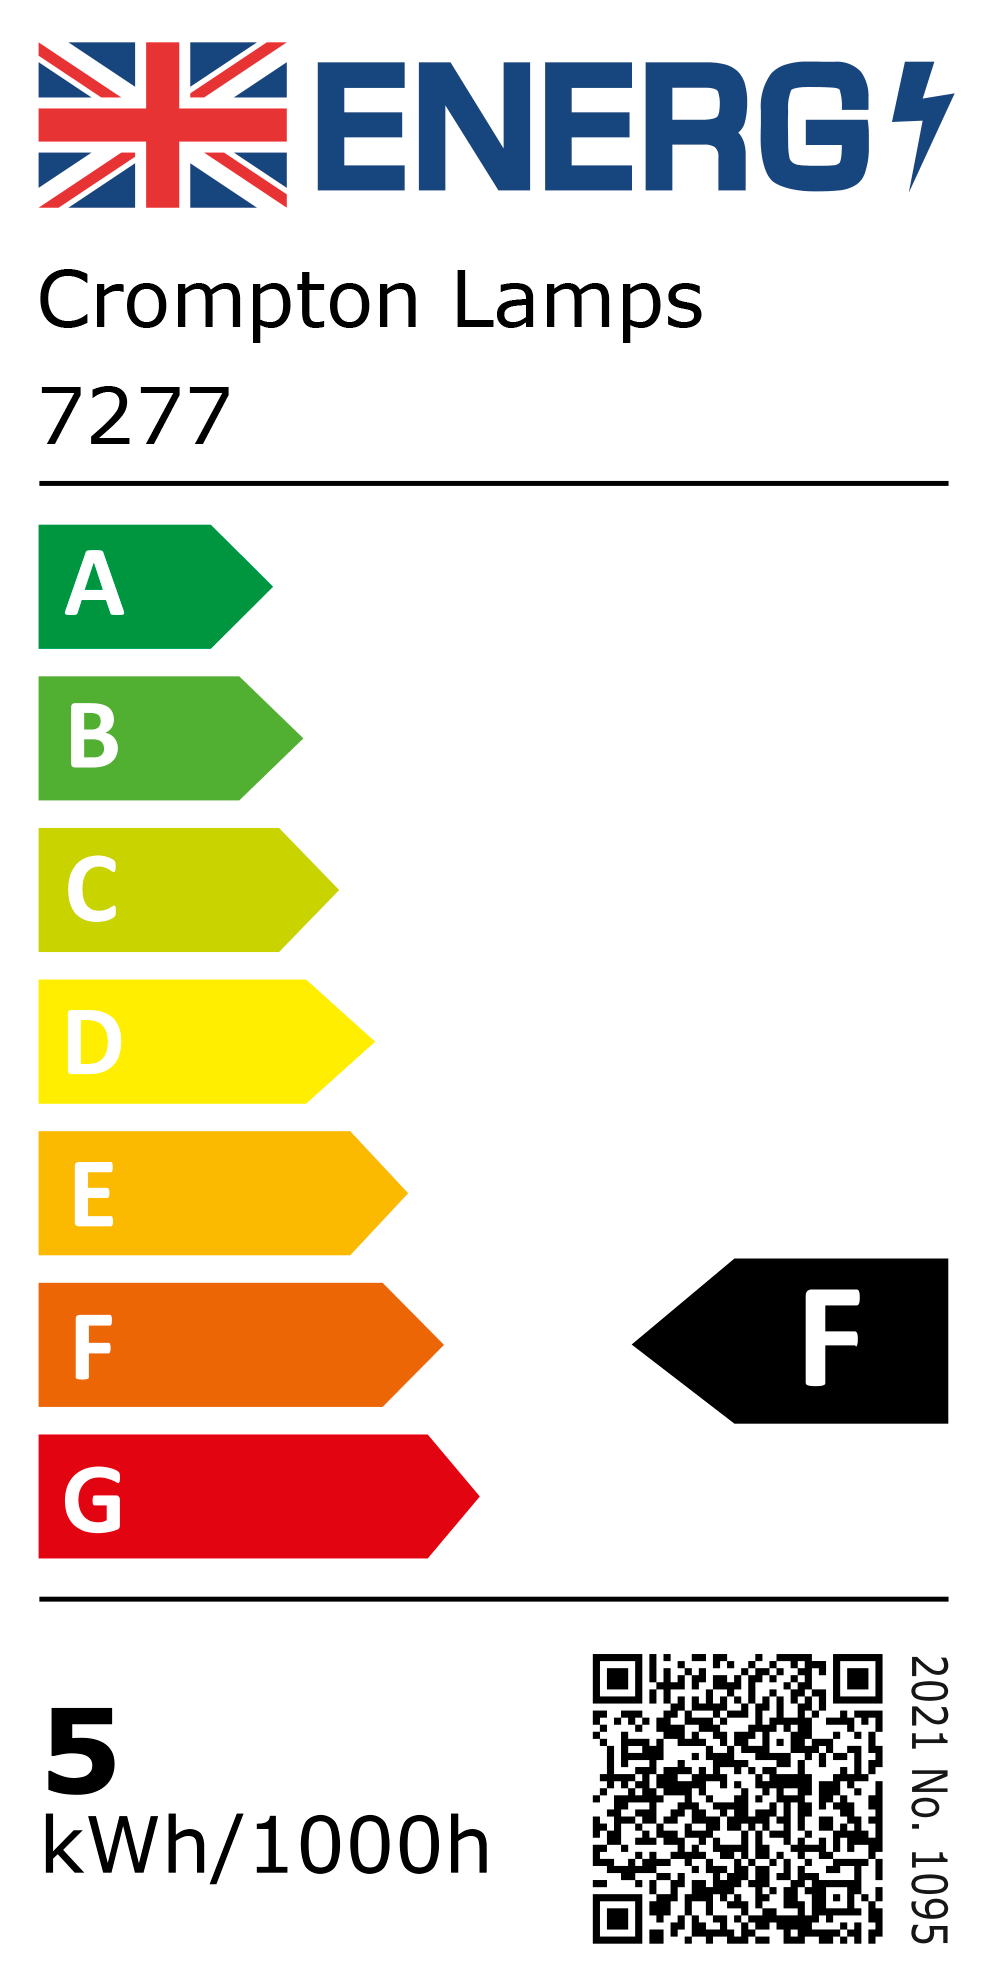 New 2021 Energy Rating Label: Stock Code 7277